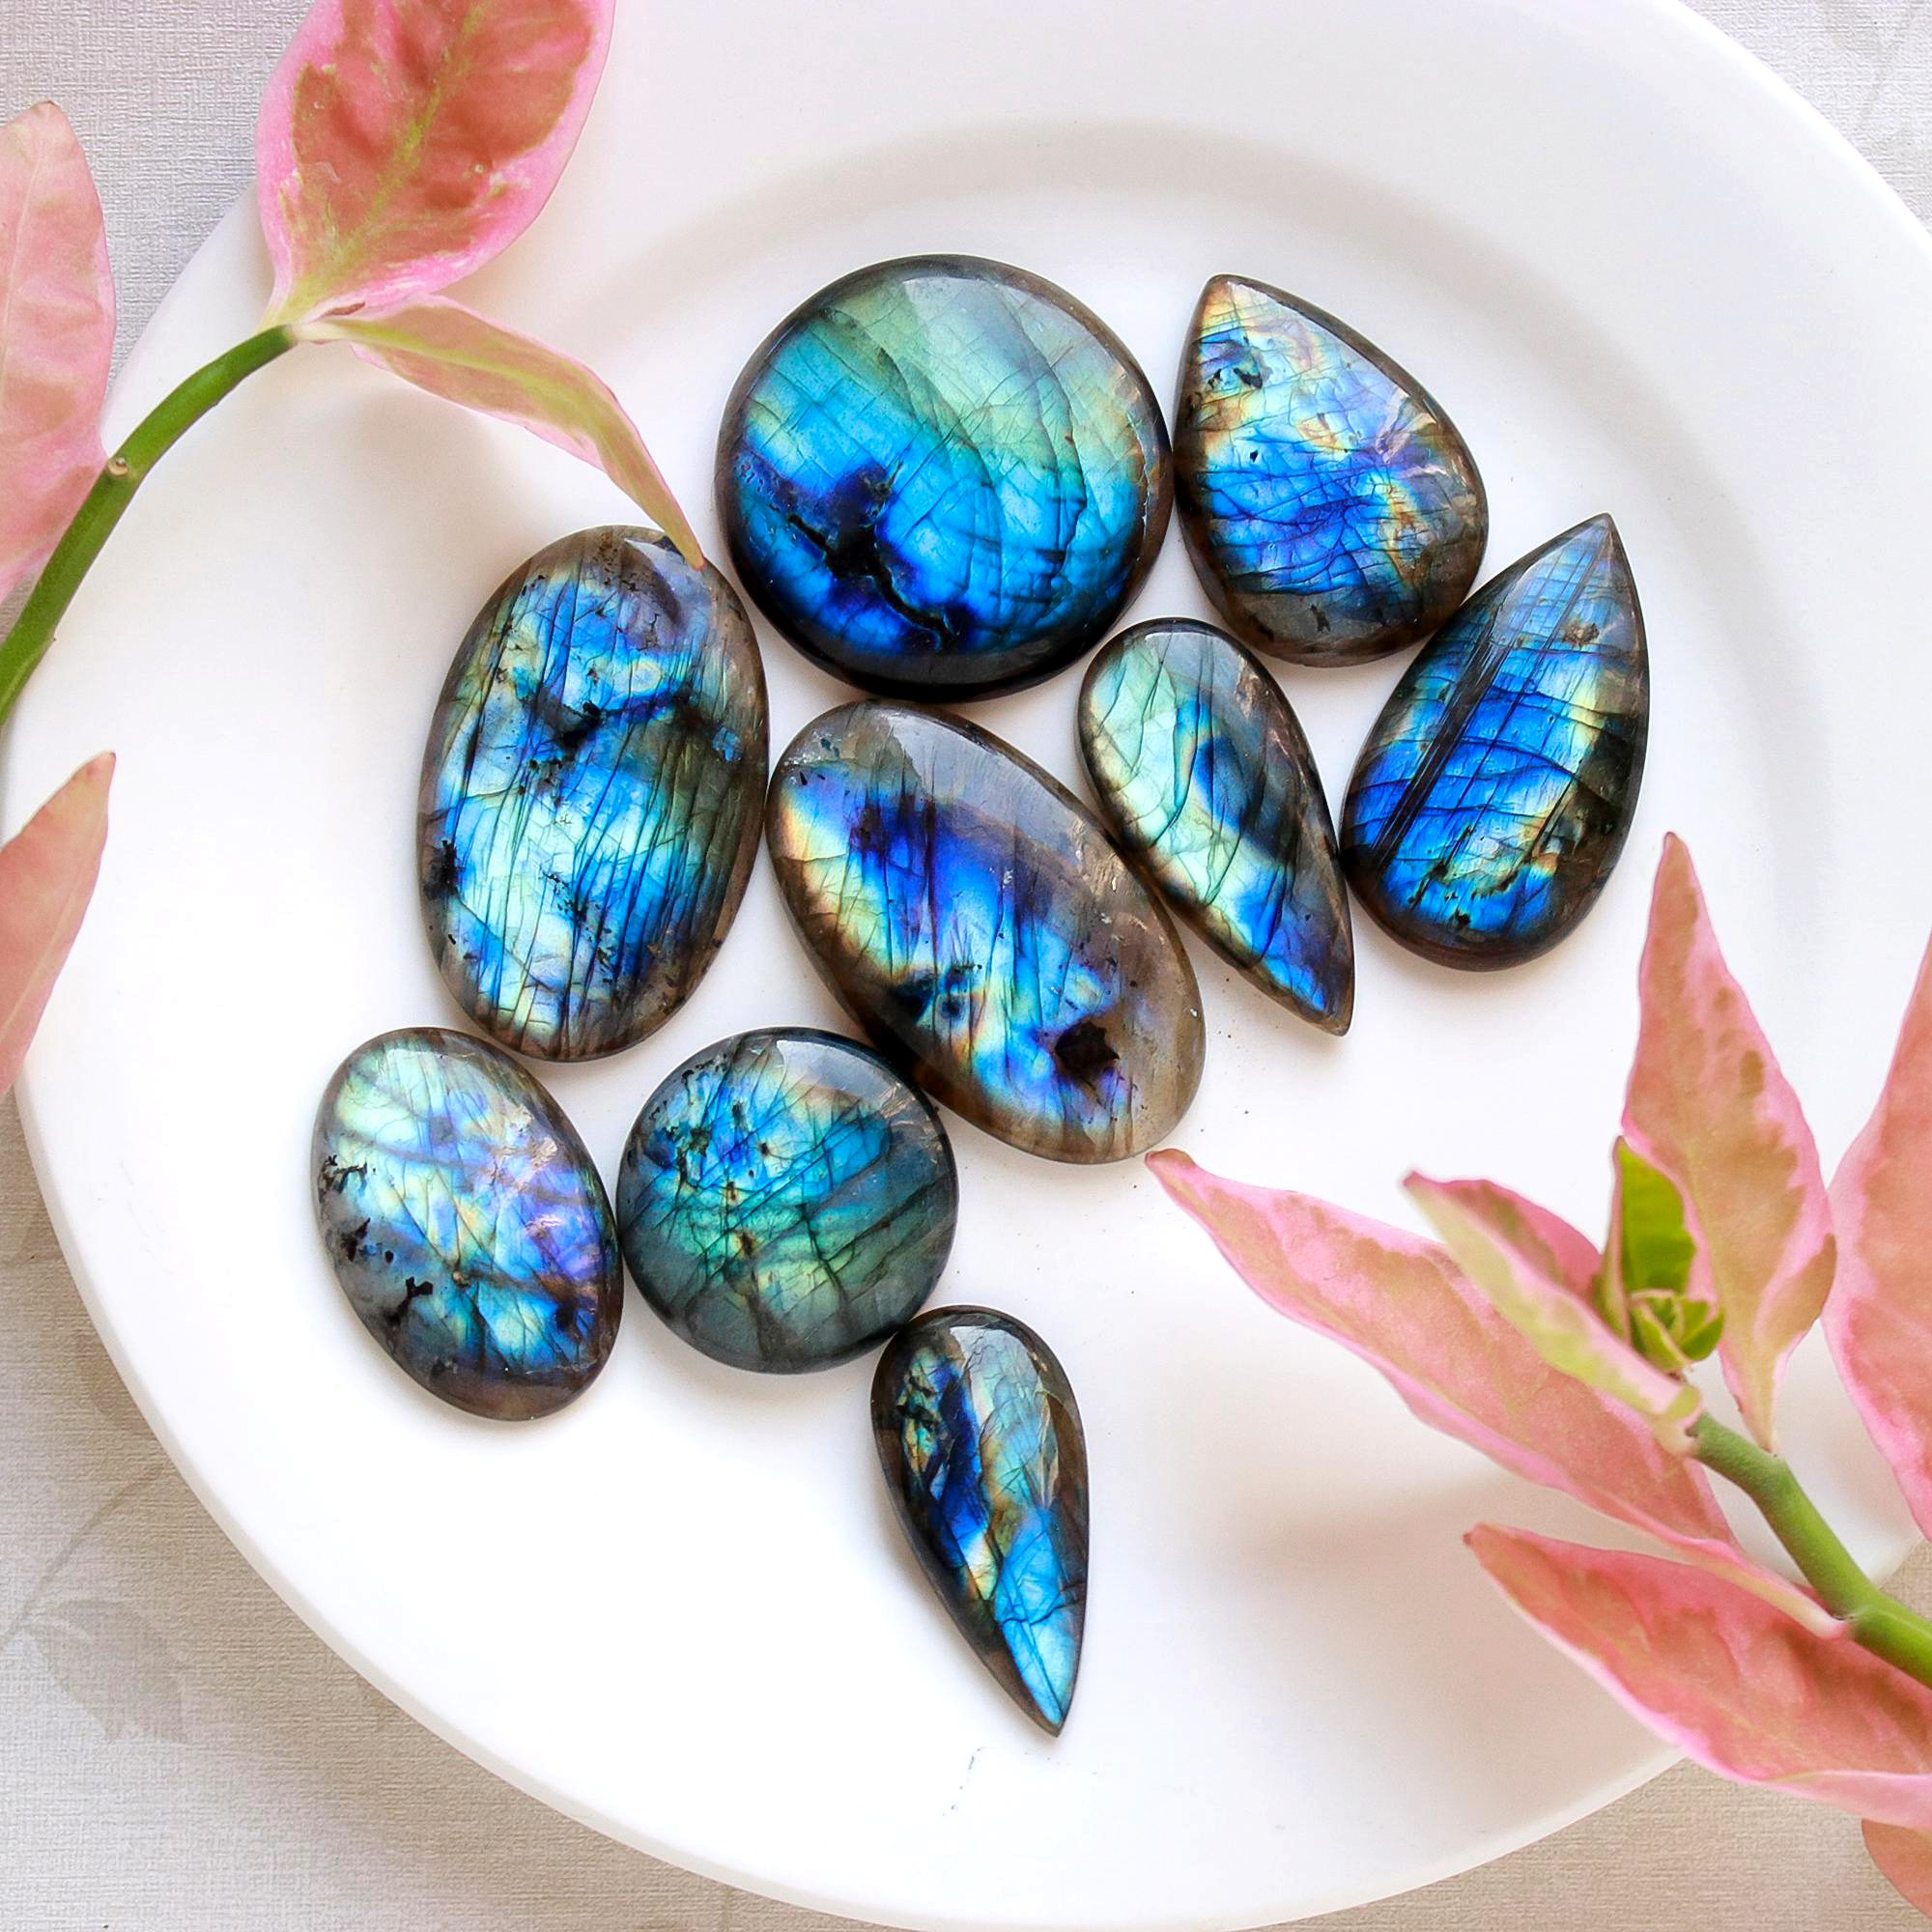 9 Pcs.563 Cts Natural labradorite Cabochon Loose Gemstone For Jewelry Wholesale Lot Size 47x30 37x26mm